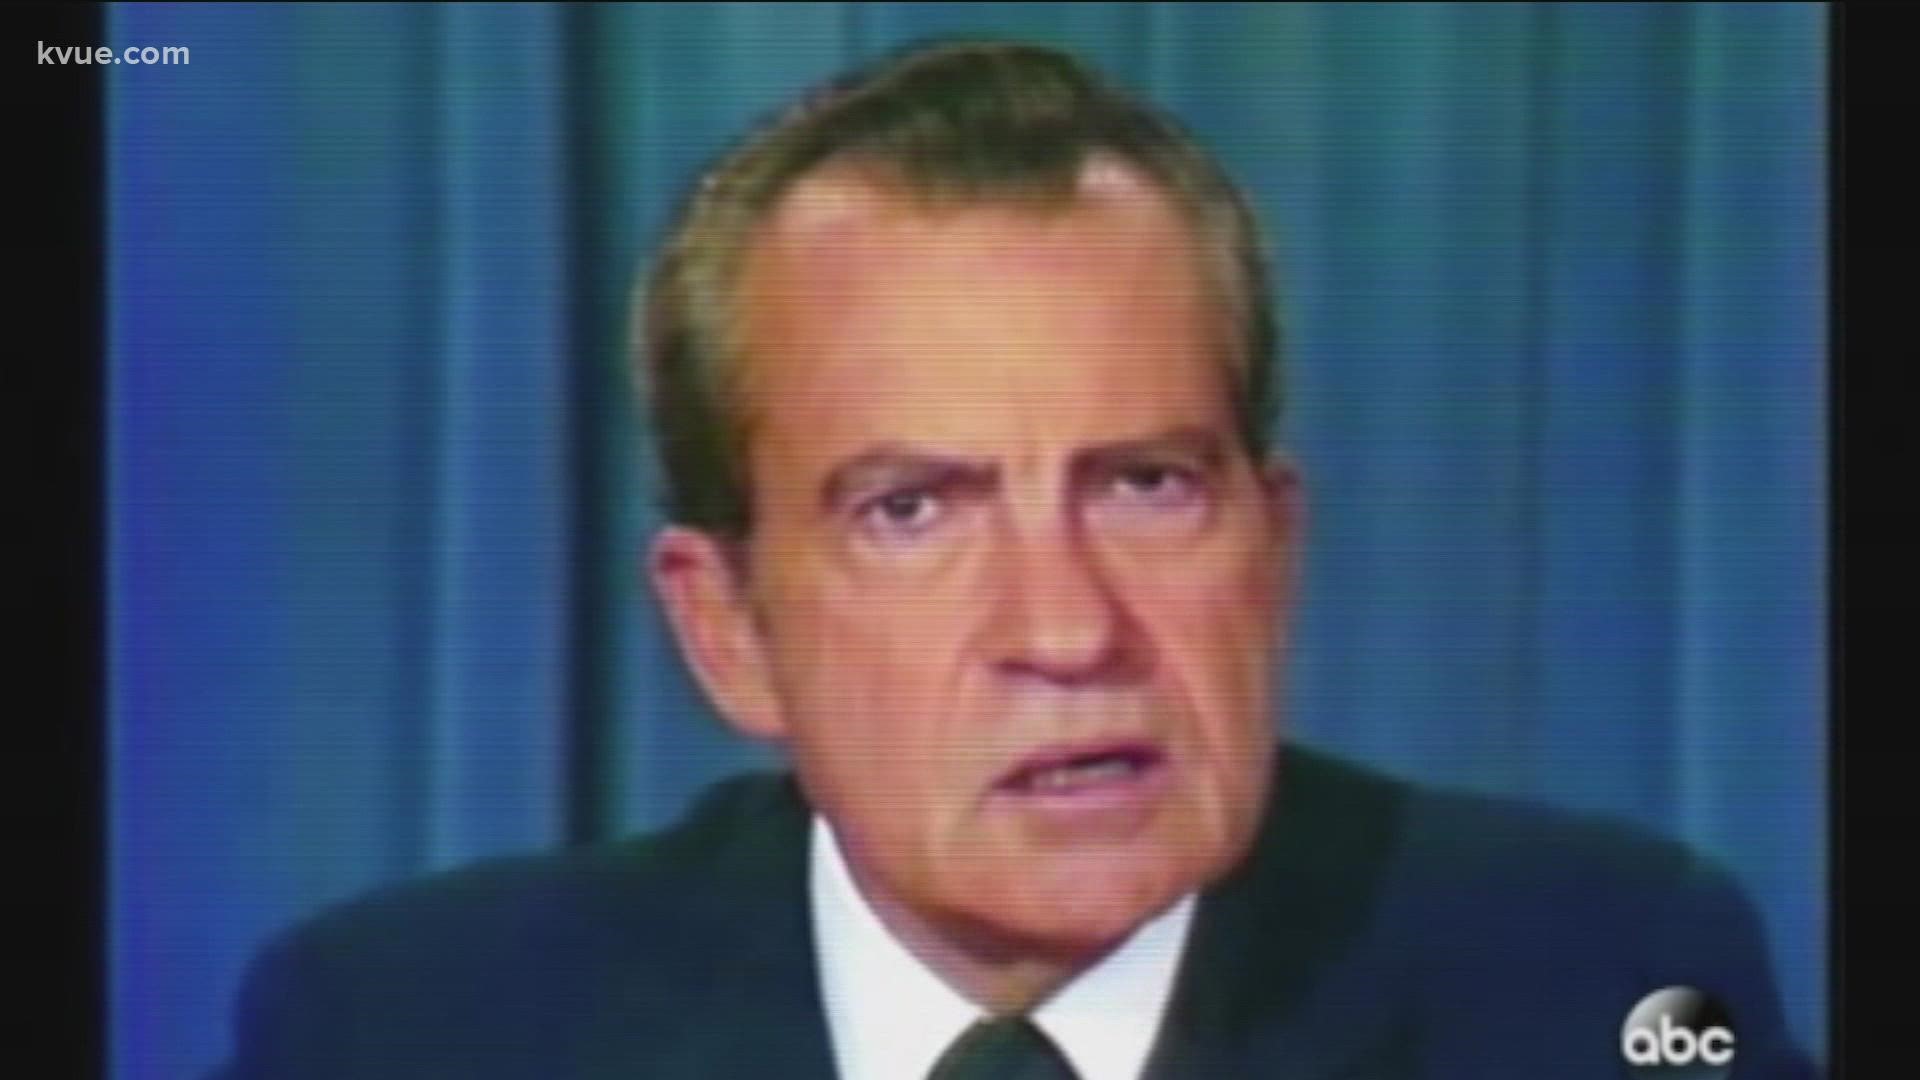 Richard Nixon left the White House for good after resigning from the presidency. It happened on Aug. 8, 1974.